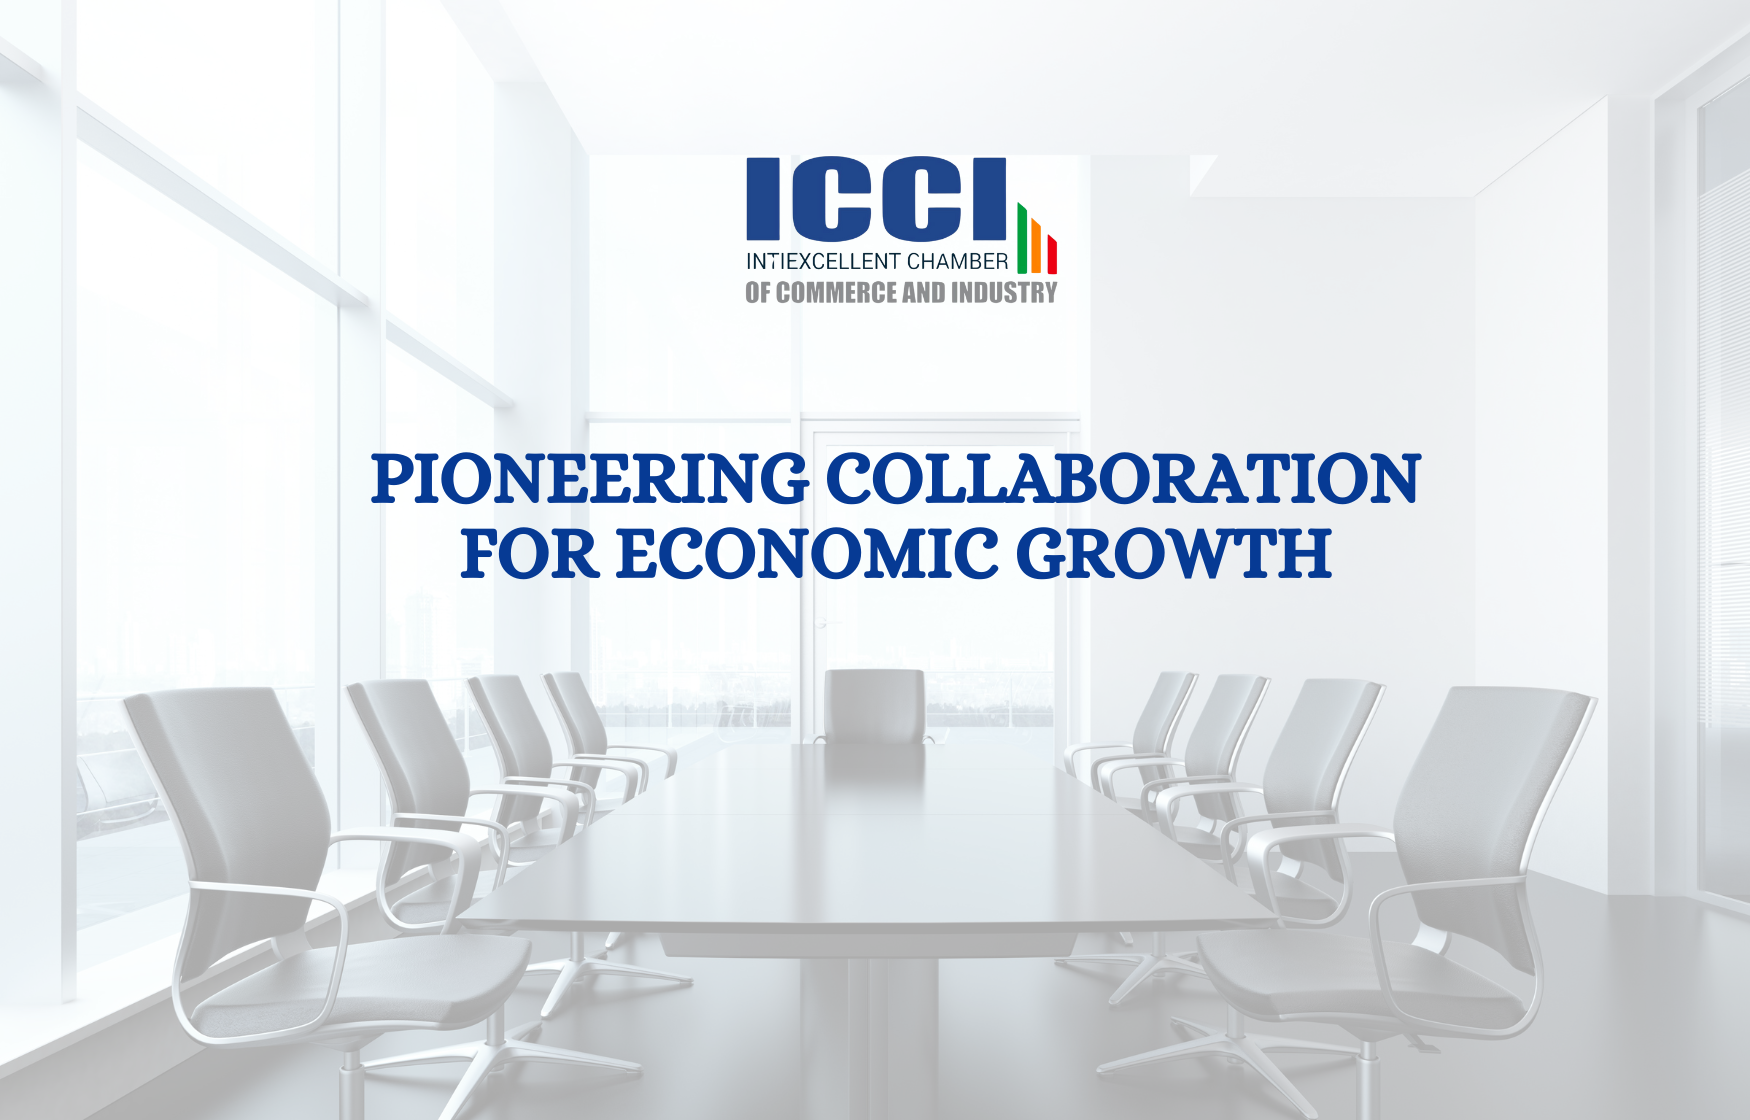 Intiexcellent Chamber of Commerce and Industry (ICCI)